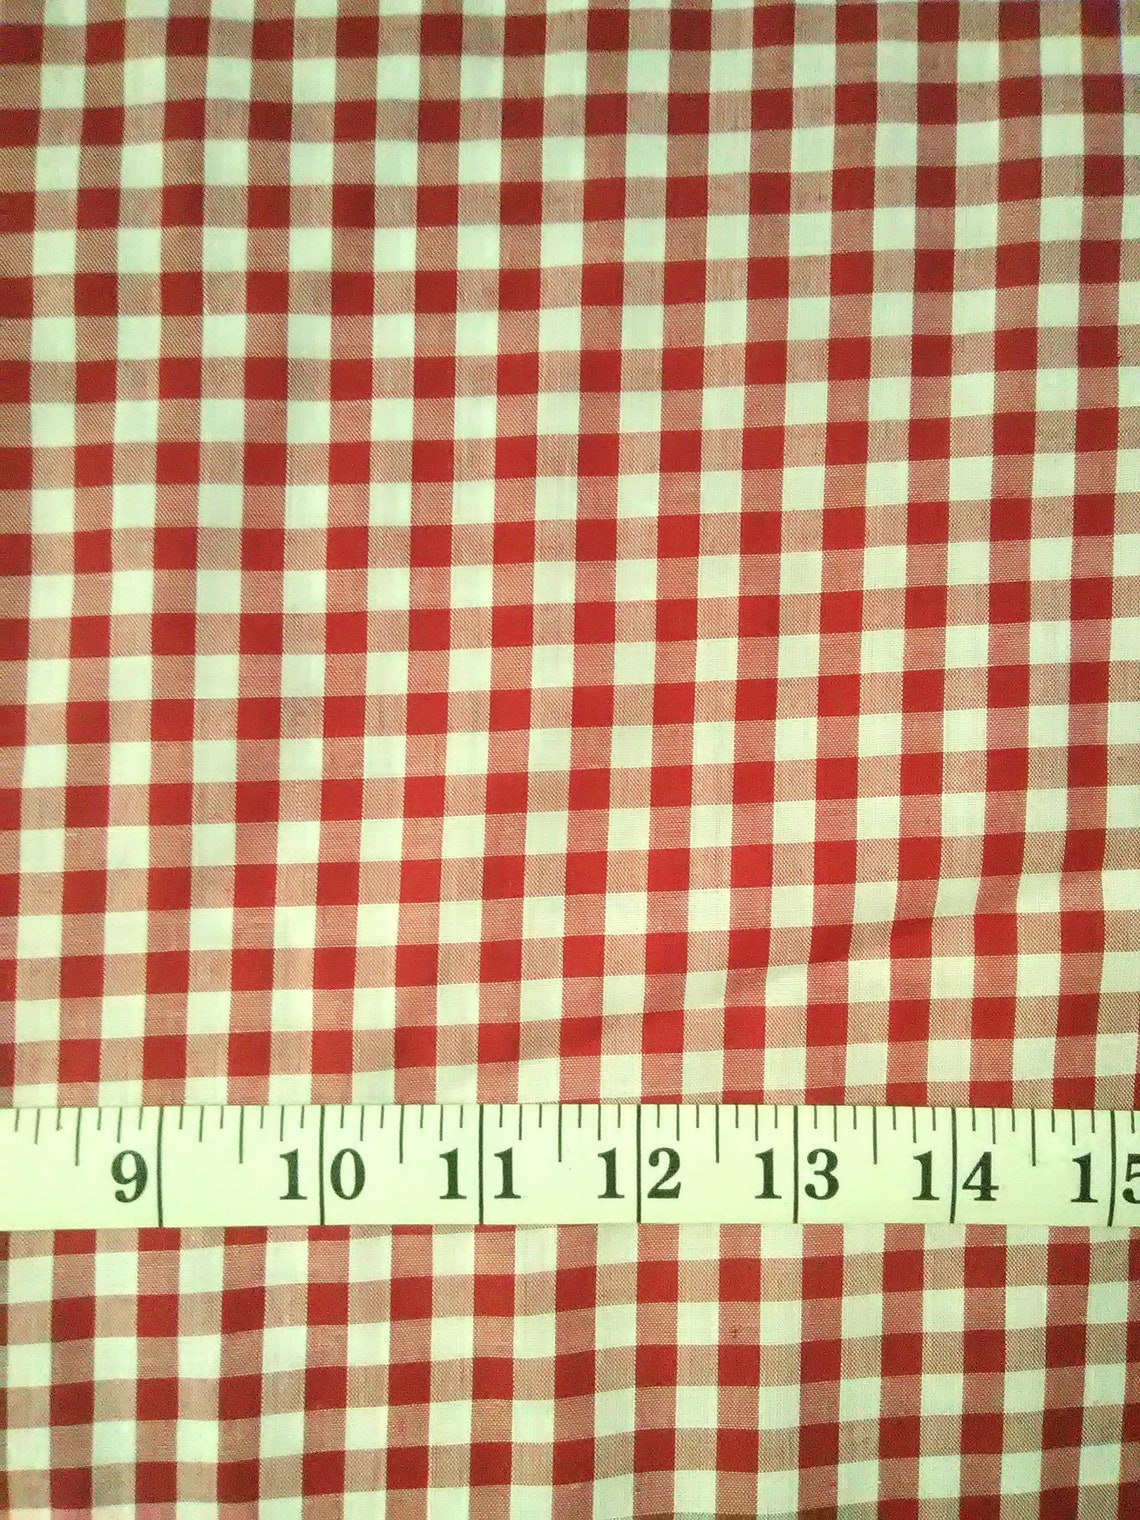 Gingham Cotton Blend Fabric Red White Gingham 60 Wide | Etsy